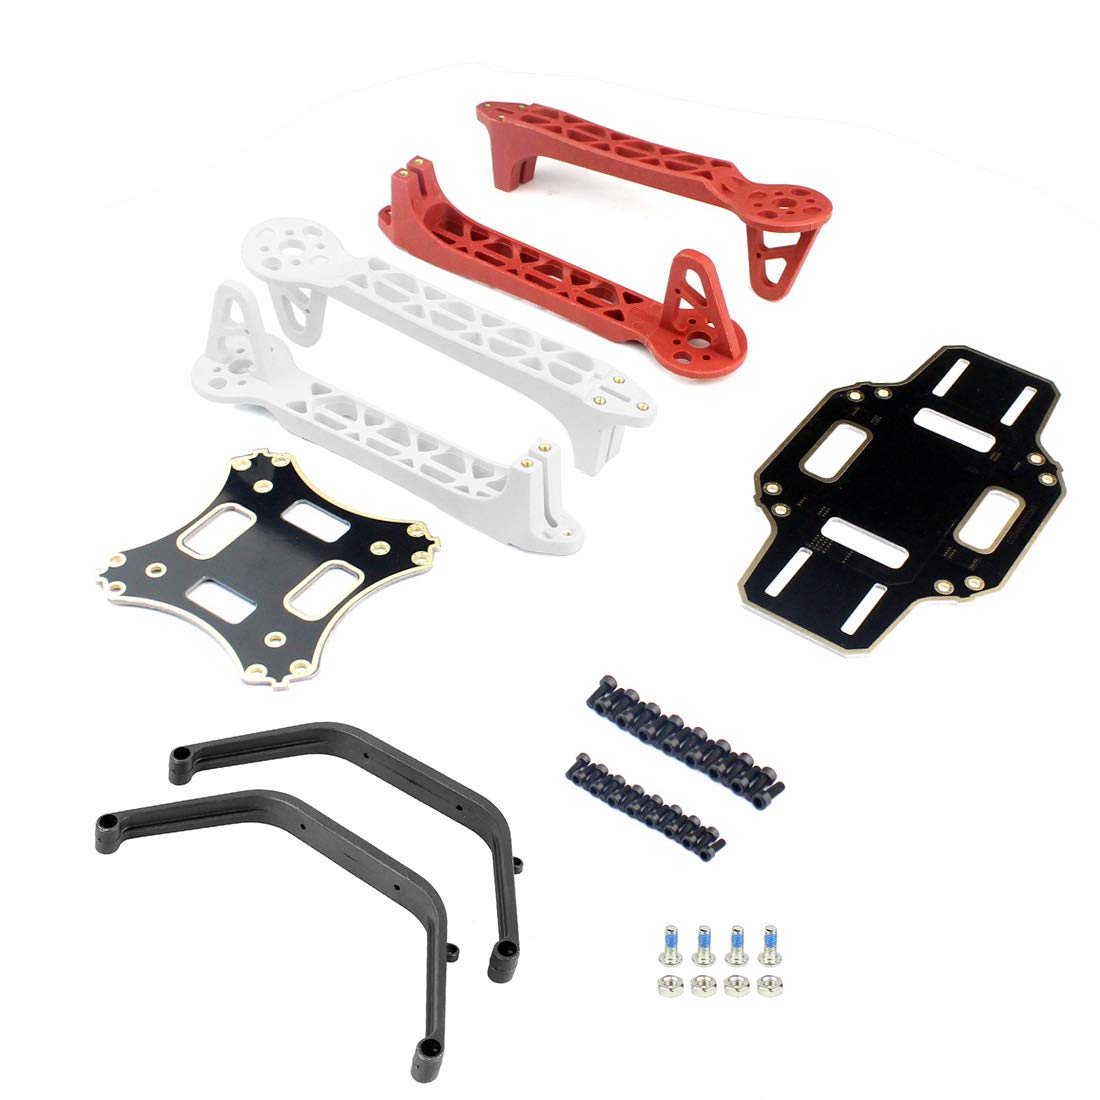 QWinOut 330mm DIY RC Drone Kit F330 Frame RC Quadcopter 4-Axle UFO Unassembly Kit 6M GPS APM2.8 Flight Control for Beginners (No Battery and Remote Controller)